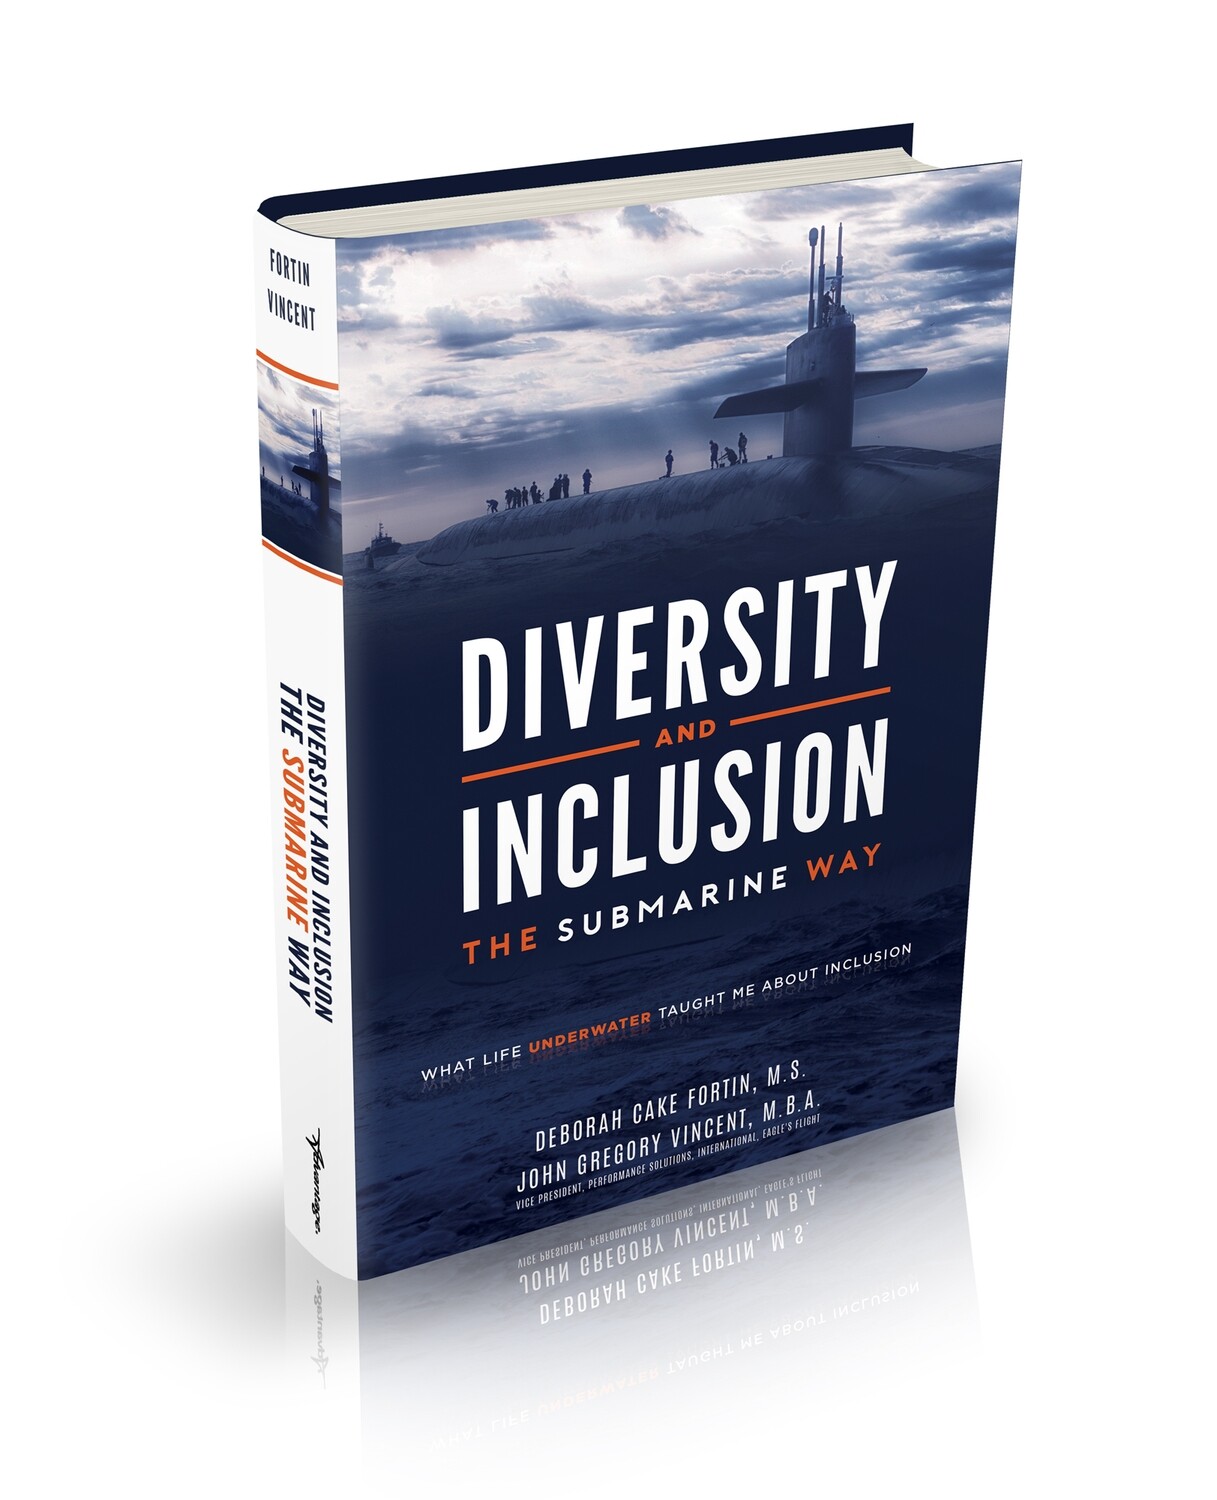 Diversity & Inclusion: The Submarine Way HARDCOVER